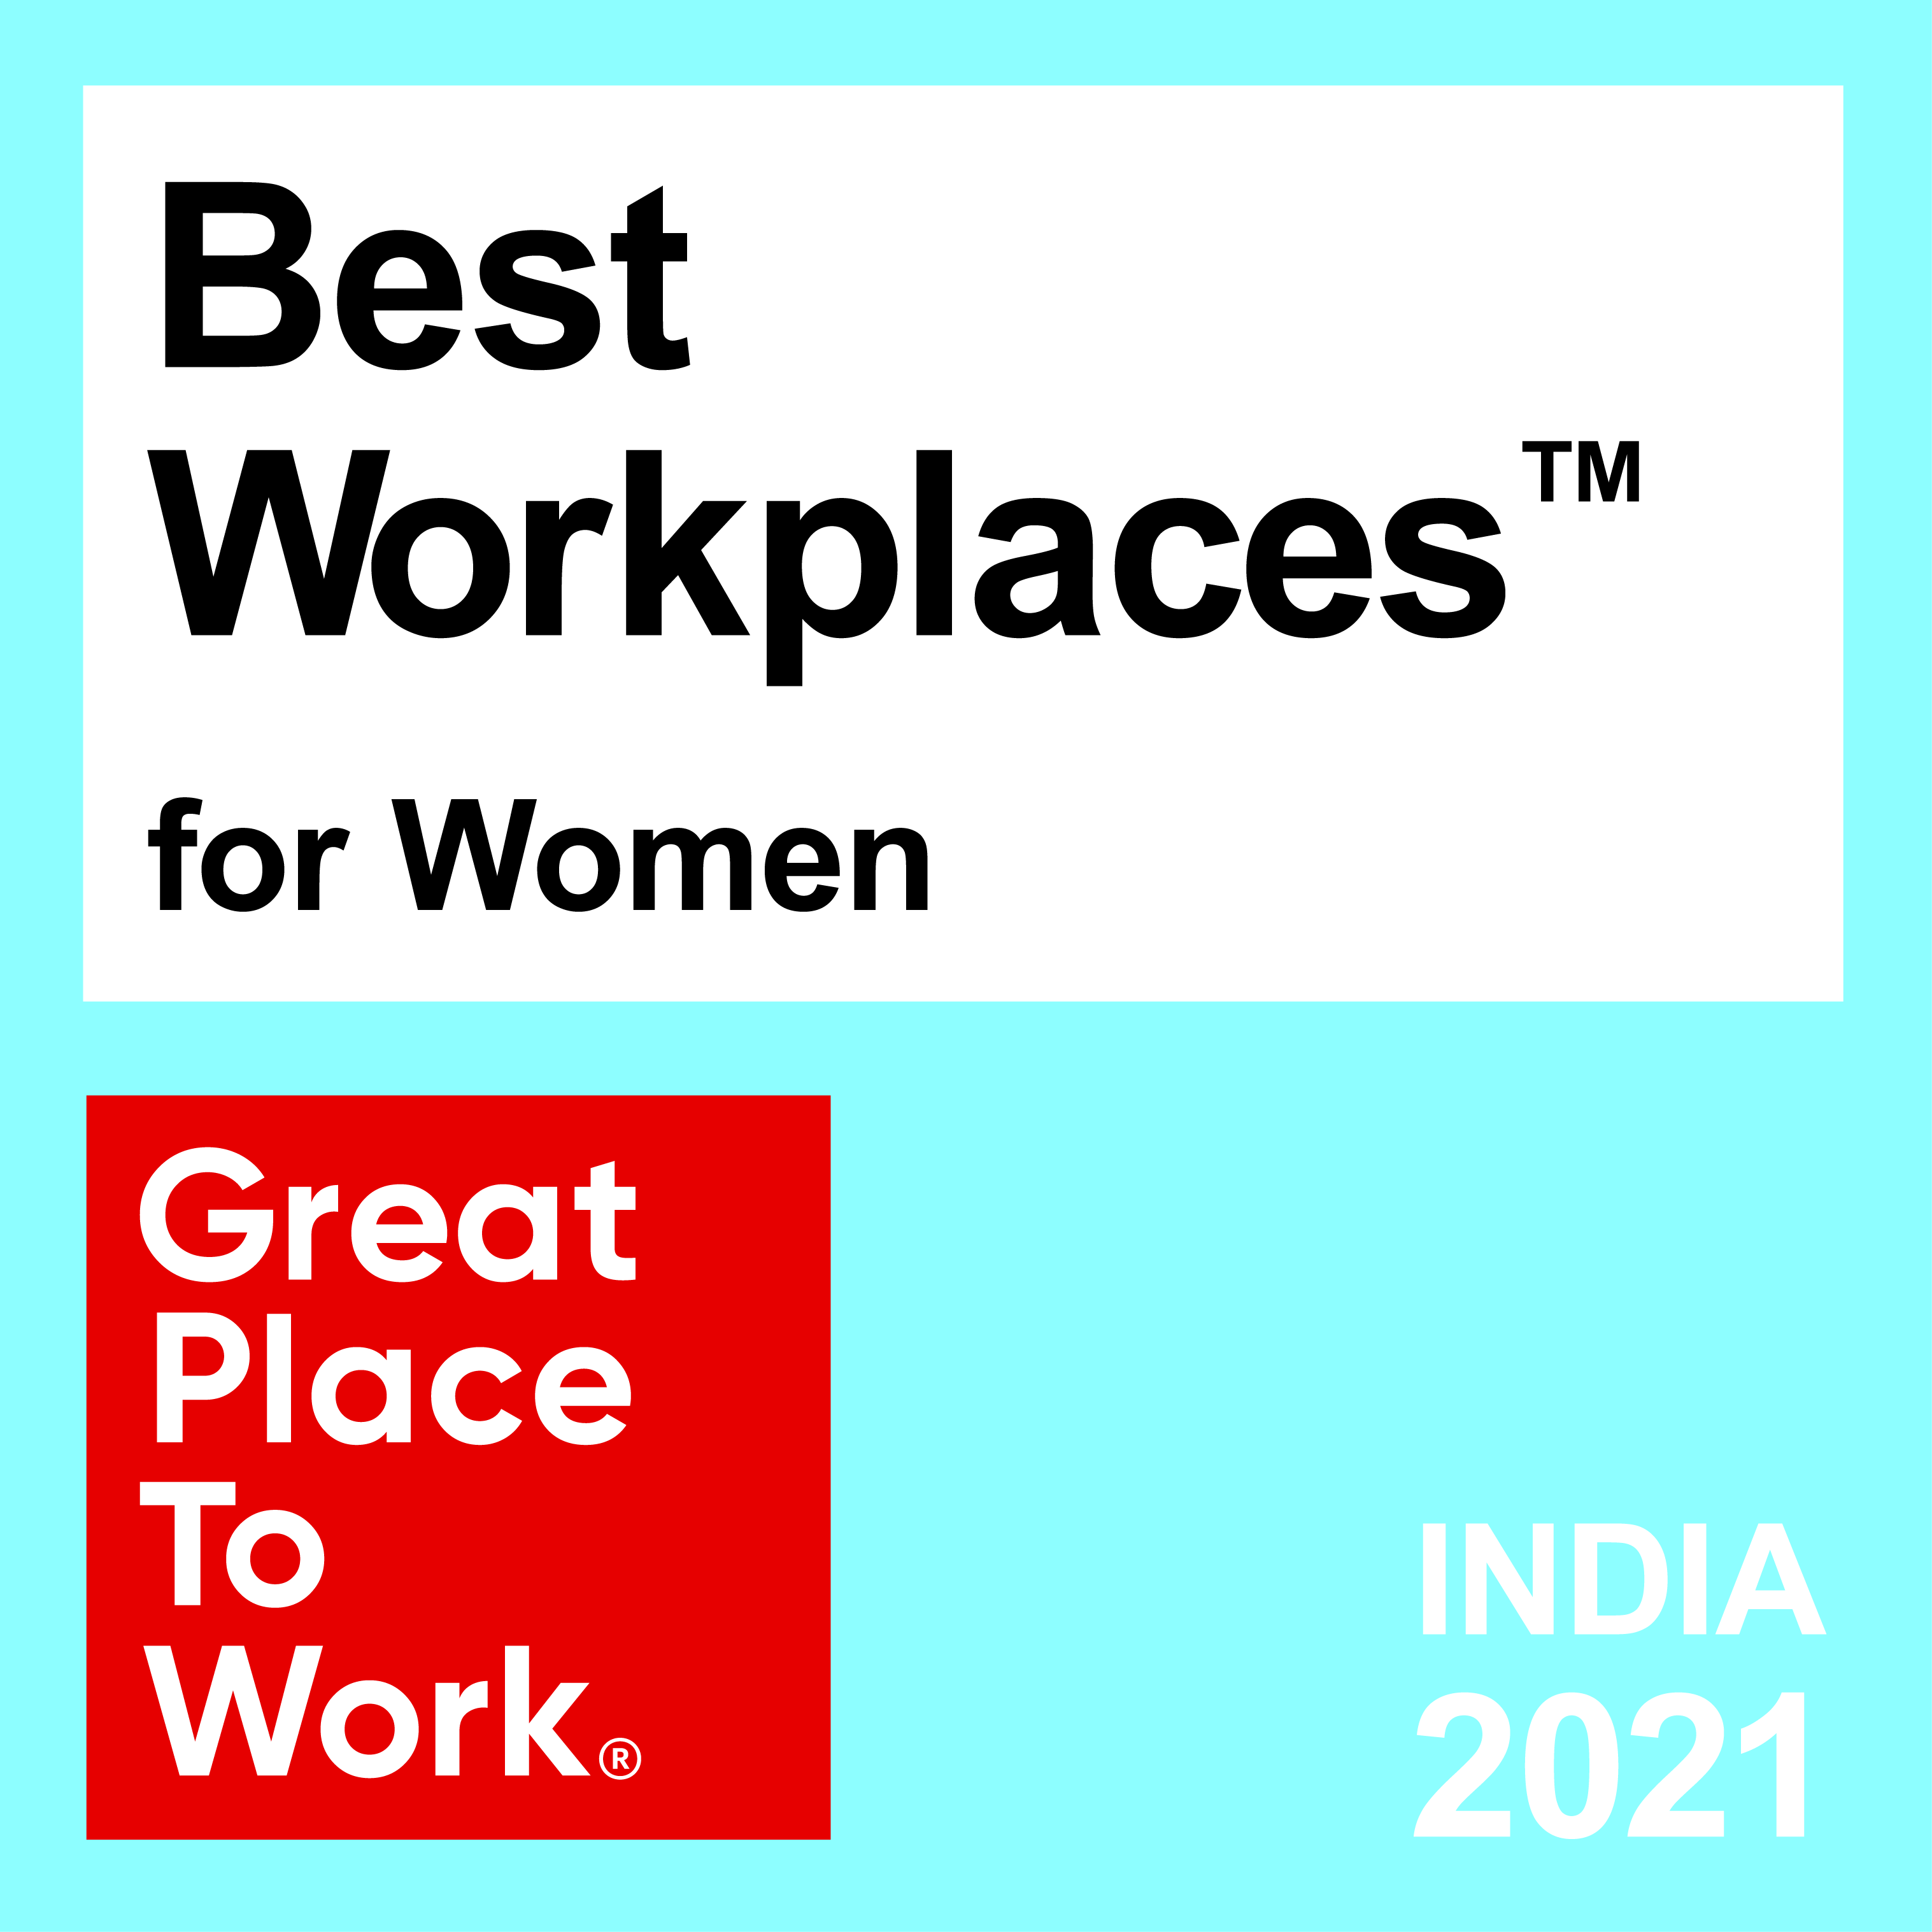 India 2021 - Best Workplaces for Women - Great place to work.